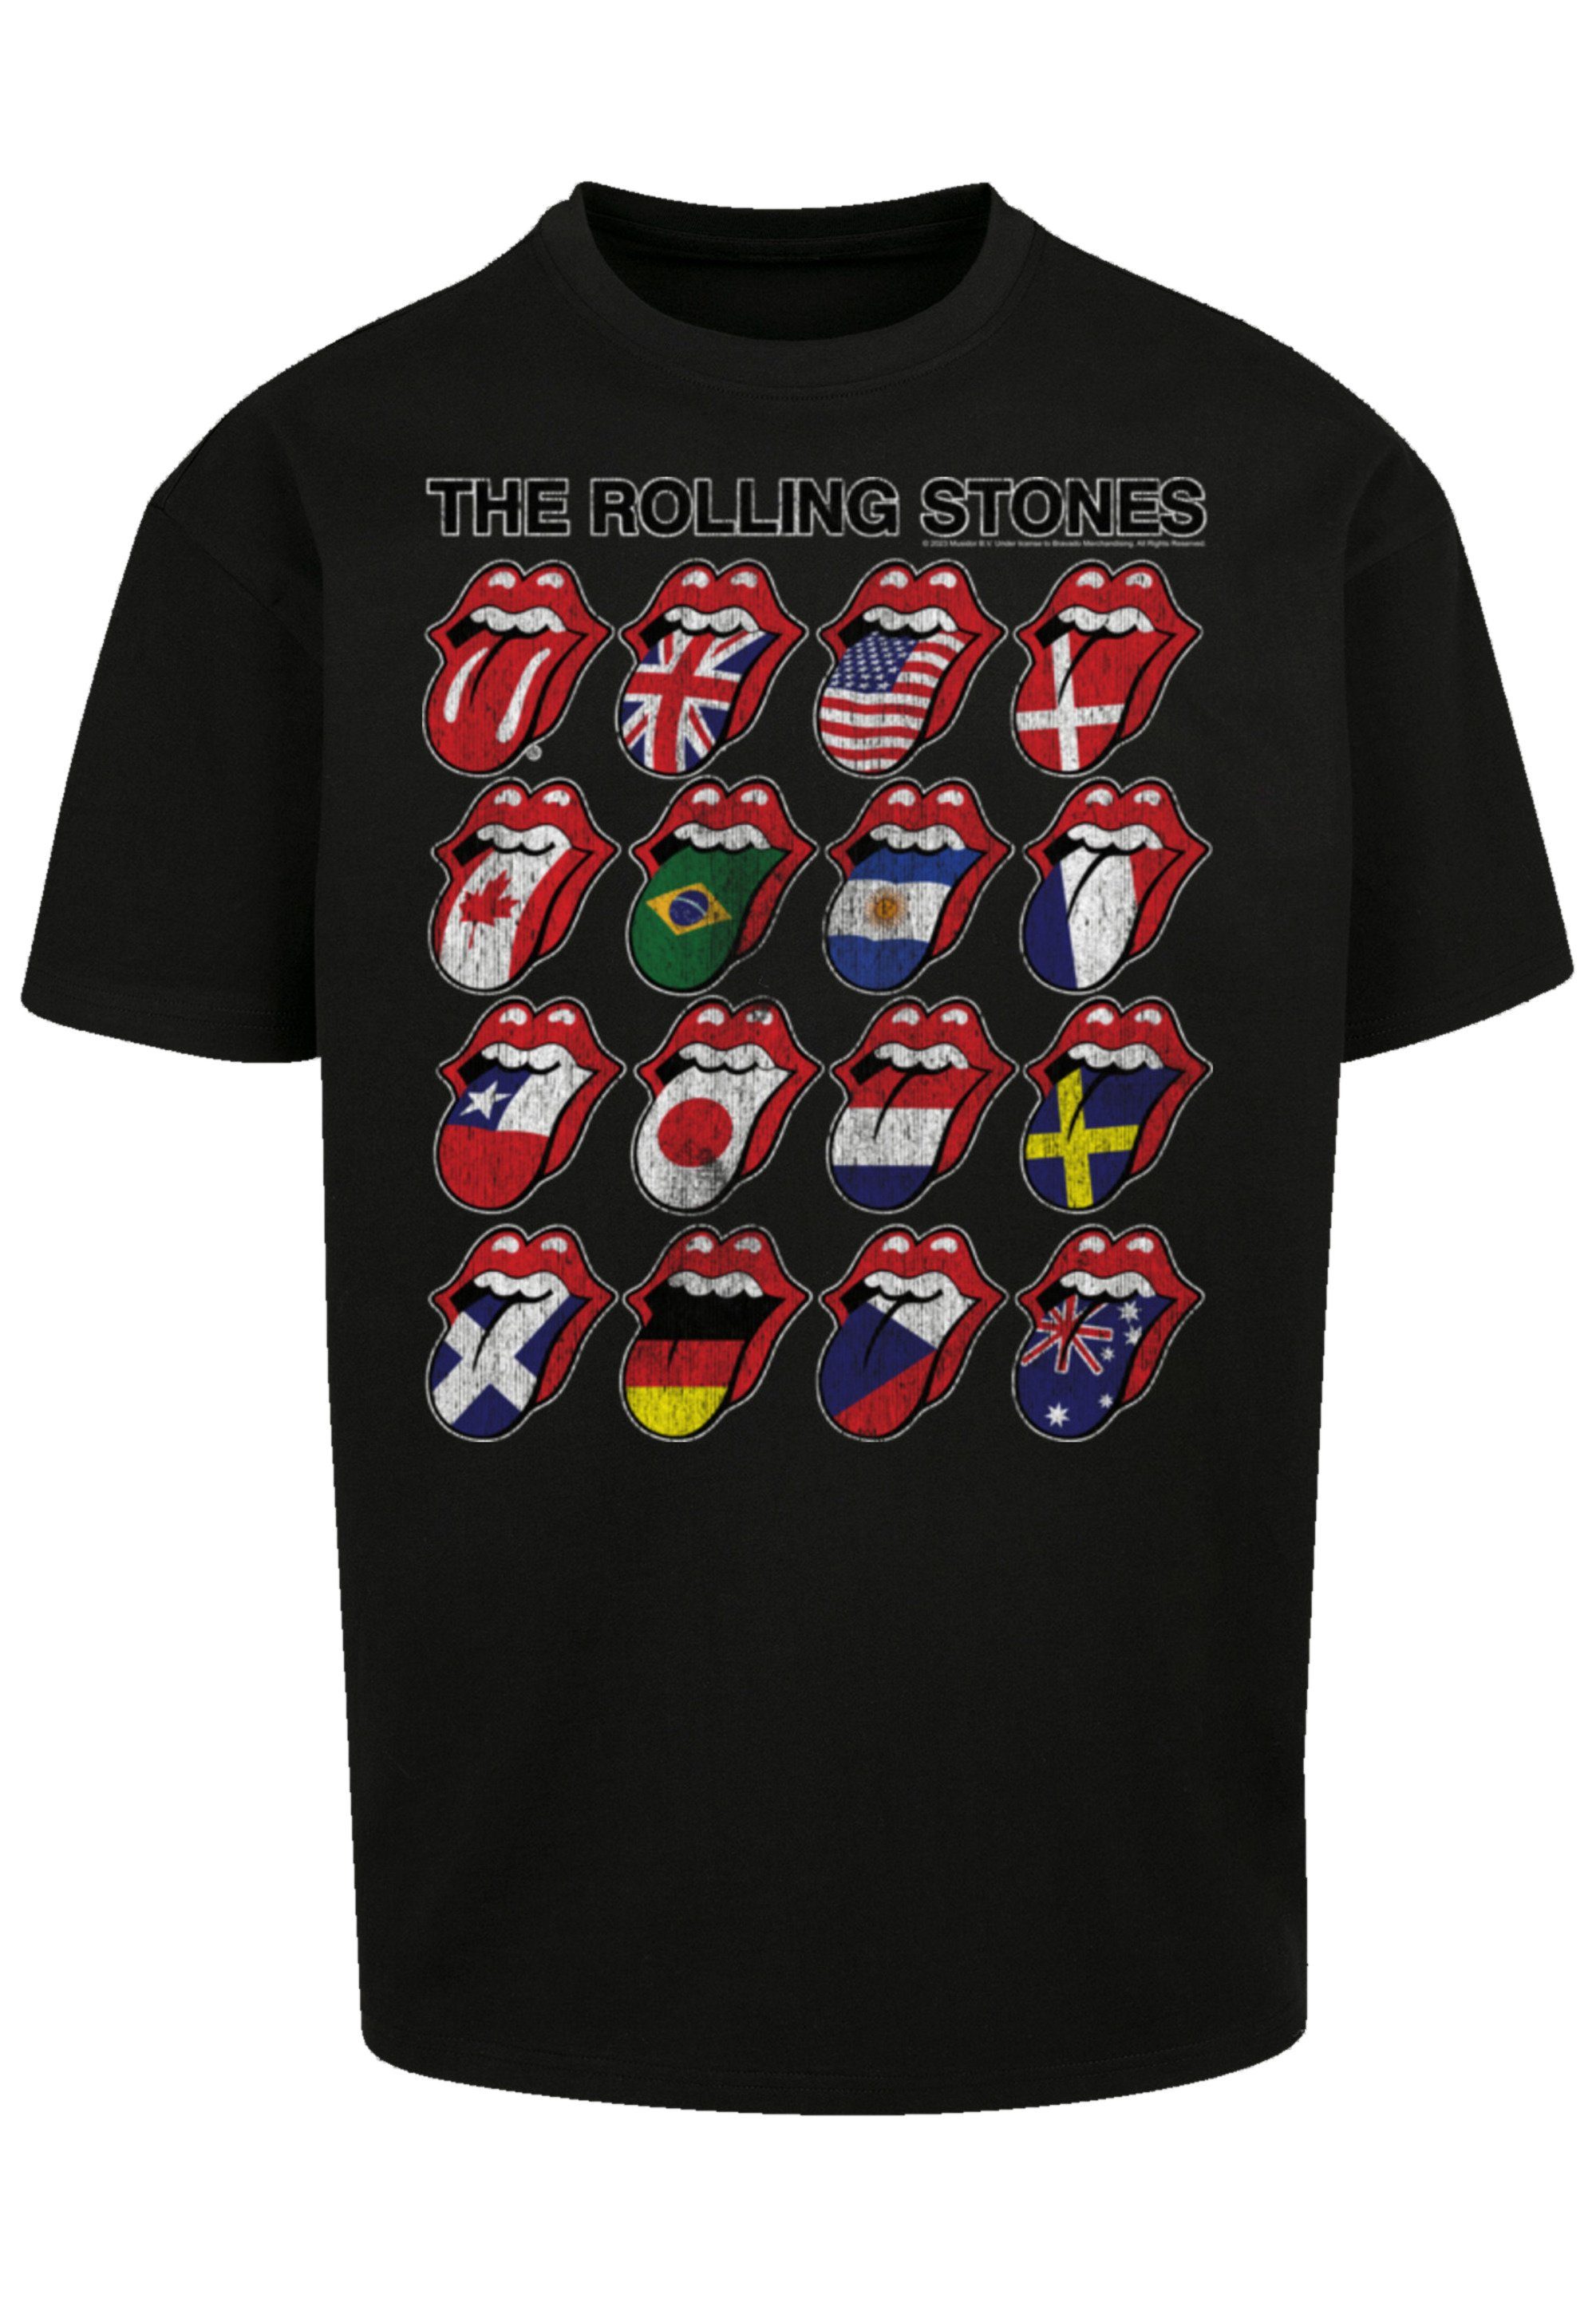 F4NT4STIC T-Shirt schwarz Band, Logo The Voodoo Stones Rolling Lounge Musik, Tongues